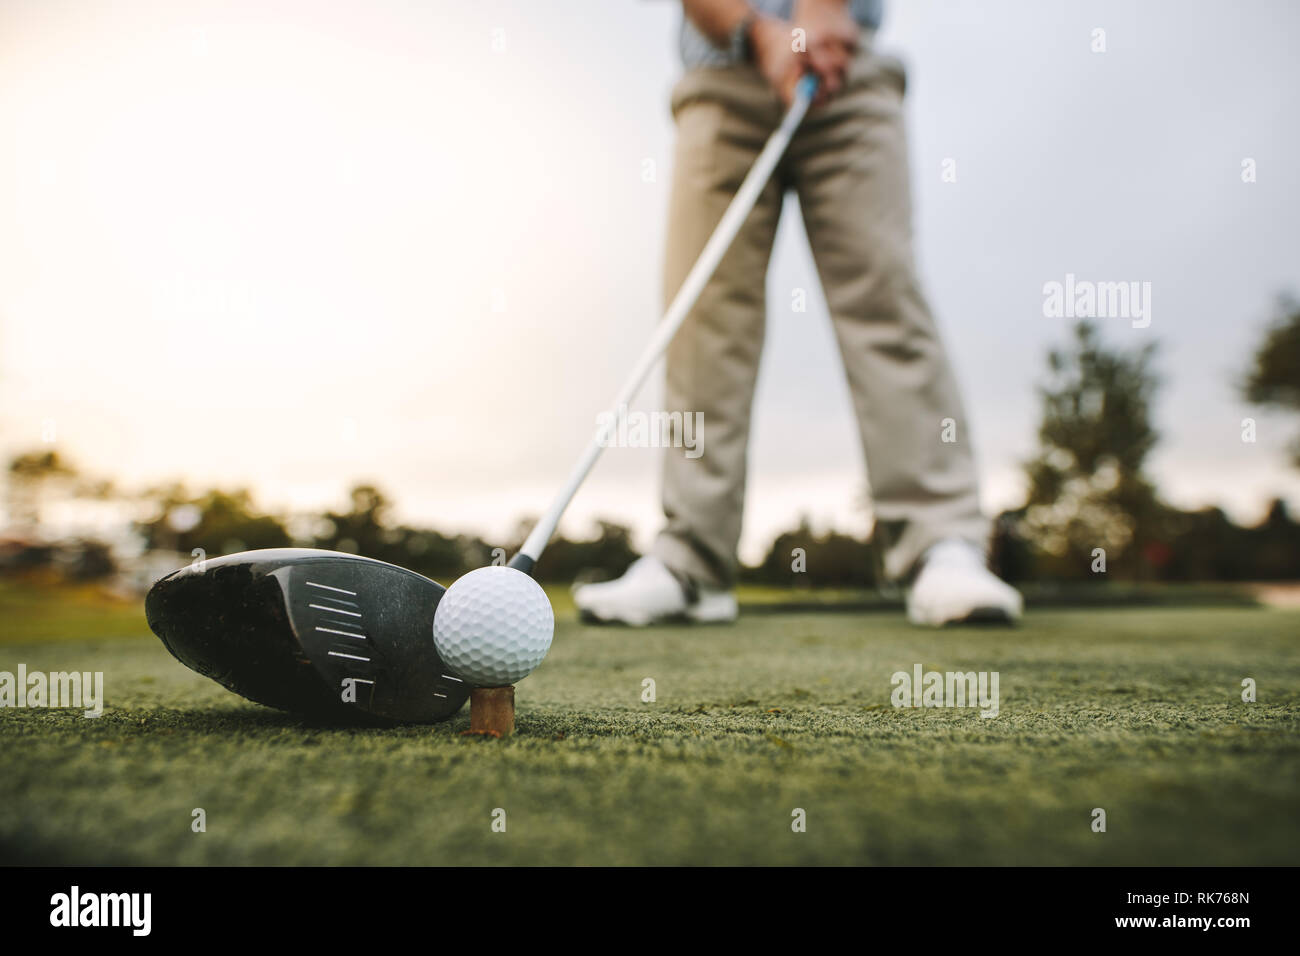 Golf club and golf ball on tee at driving range. Focus on the head of the club and ball. Stock Photo